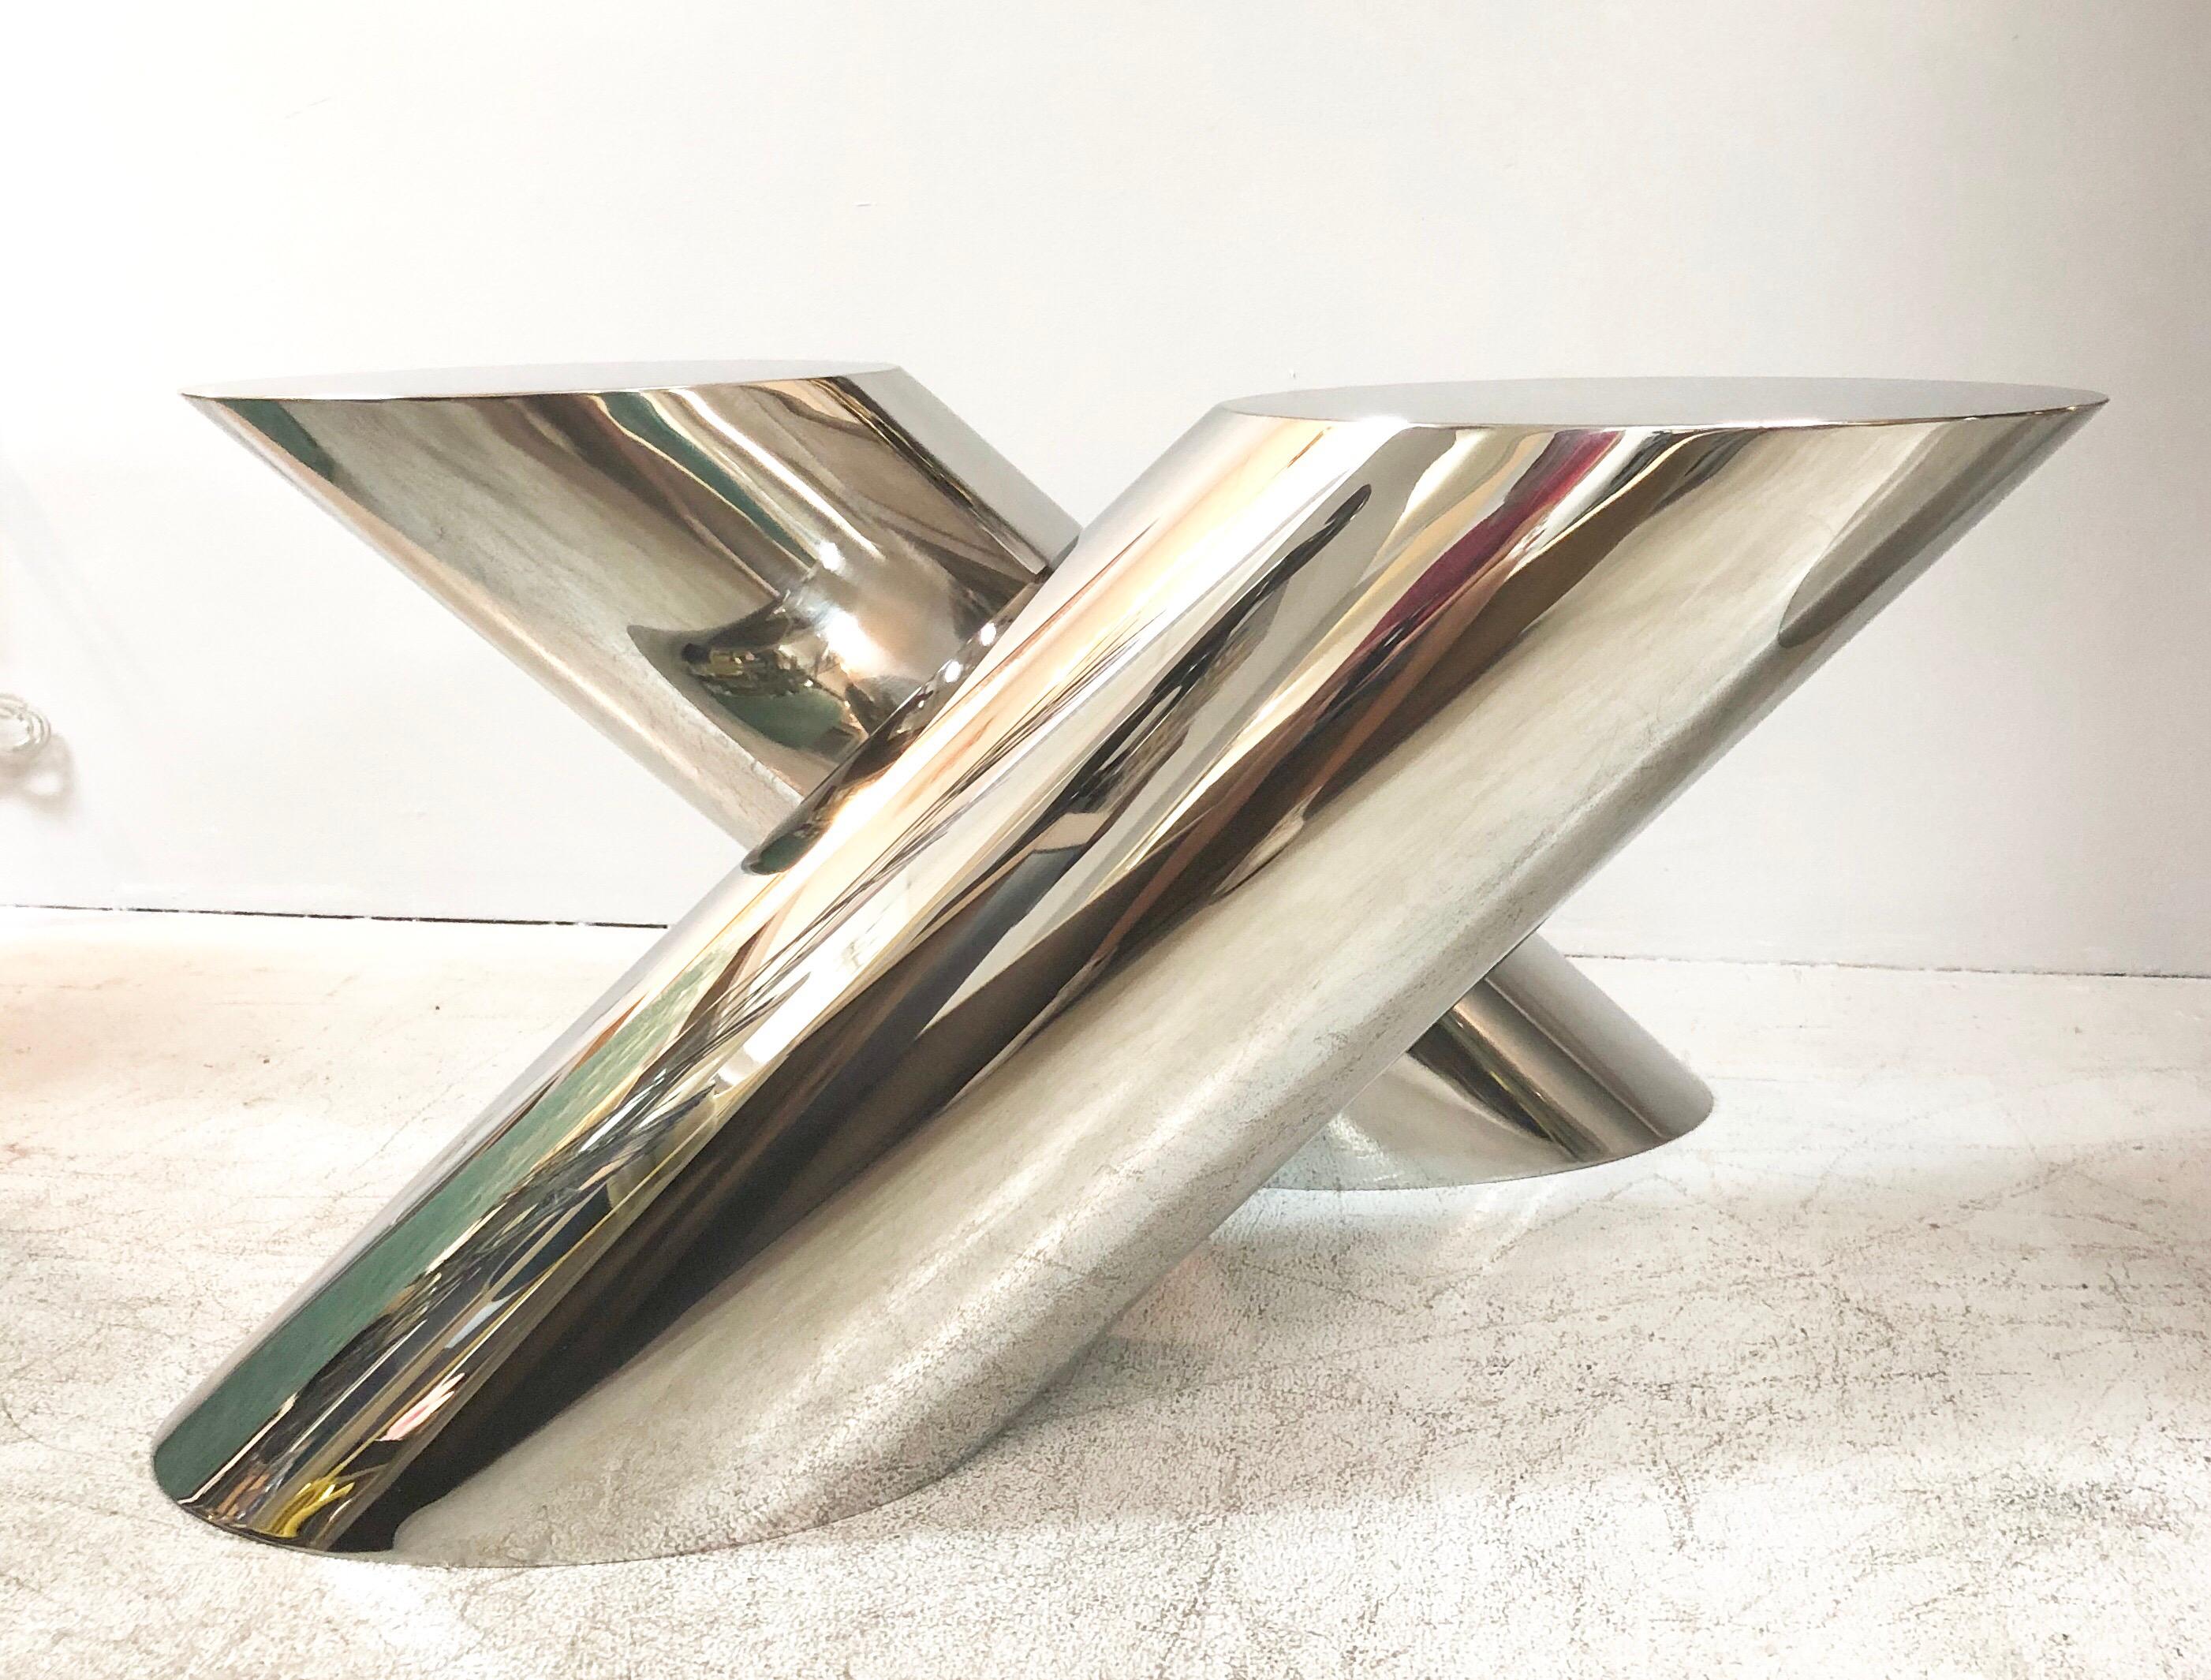 The Zephyr table by Brueton. Designed by J. Wade Beam, this table has become a classic due to its uncanny ability to evoke grace and motion. The top is 12